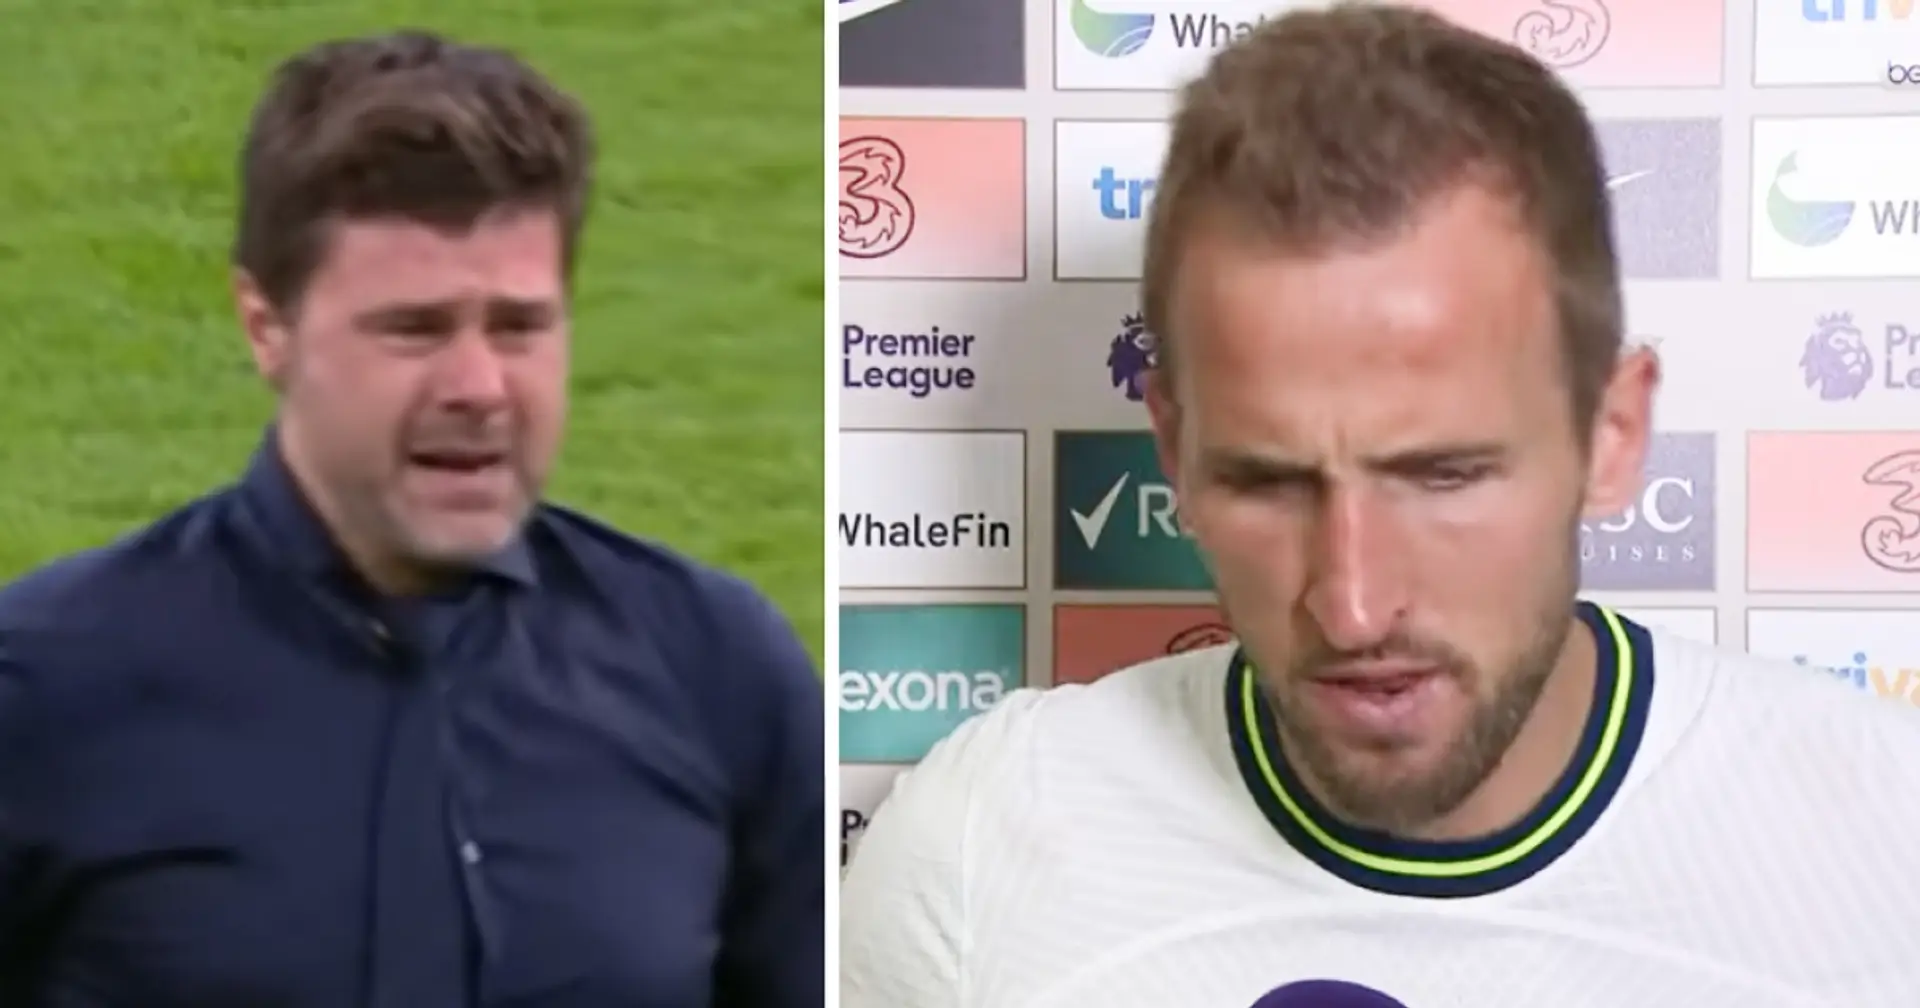 Recalling what Harry Kane said about Pochettino before he was sacked by Spurs